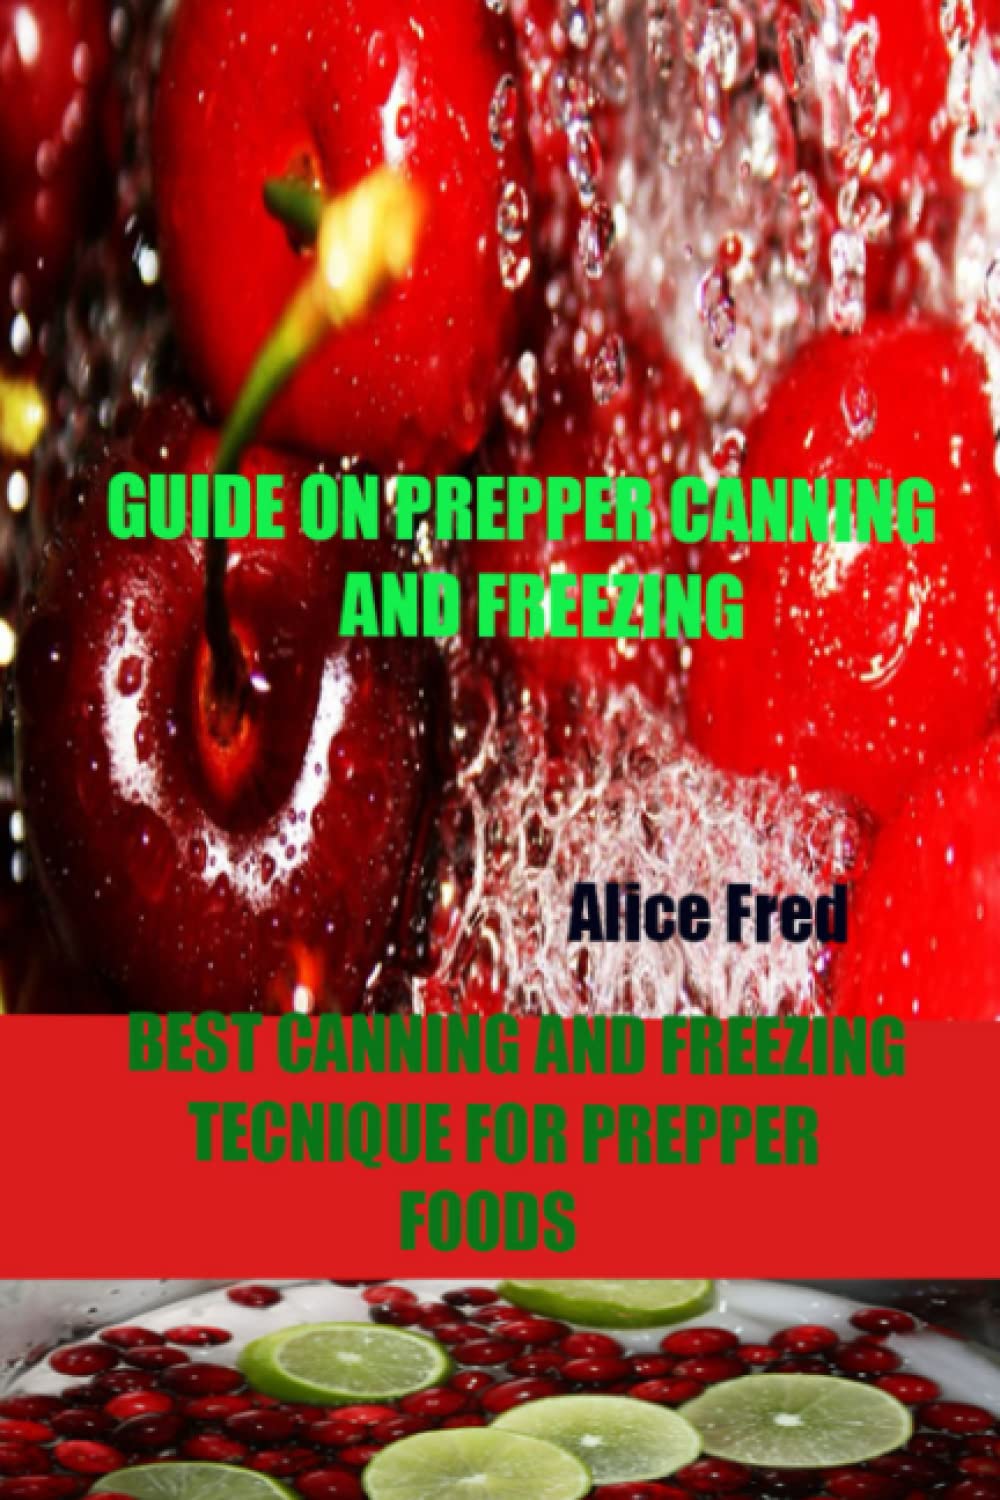 GUIDE ON PREPPER CANNING AND FREEZING: BEST PRESERVING, CANNING, AND FREEZING TECHNIQUES FOR ALL PREPPER FOODS